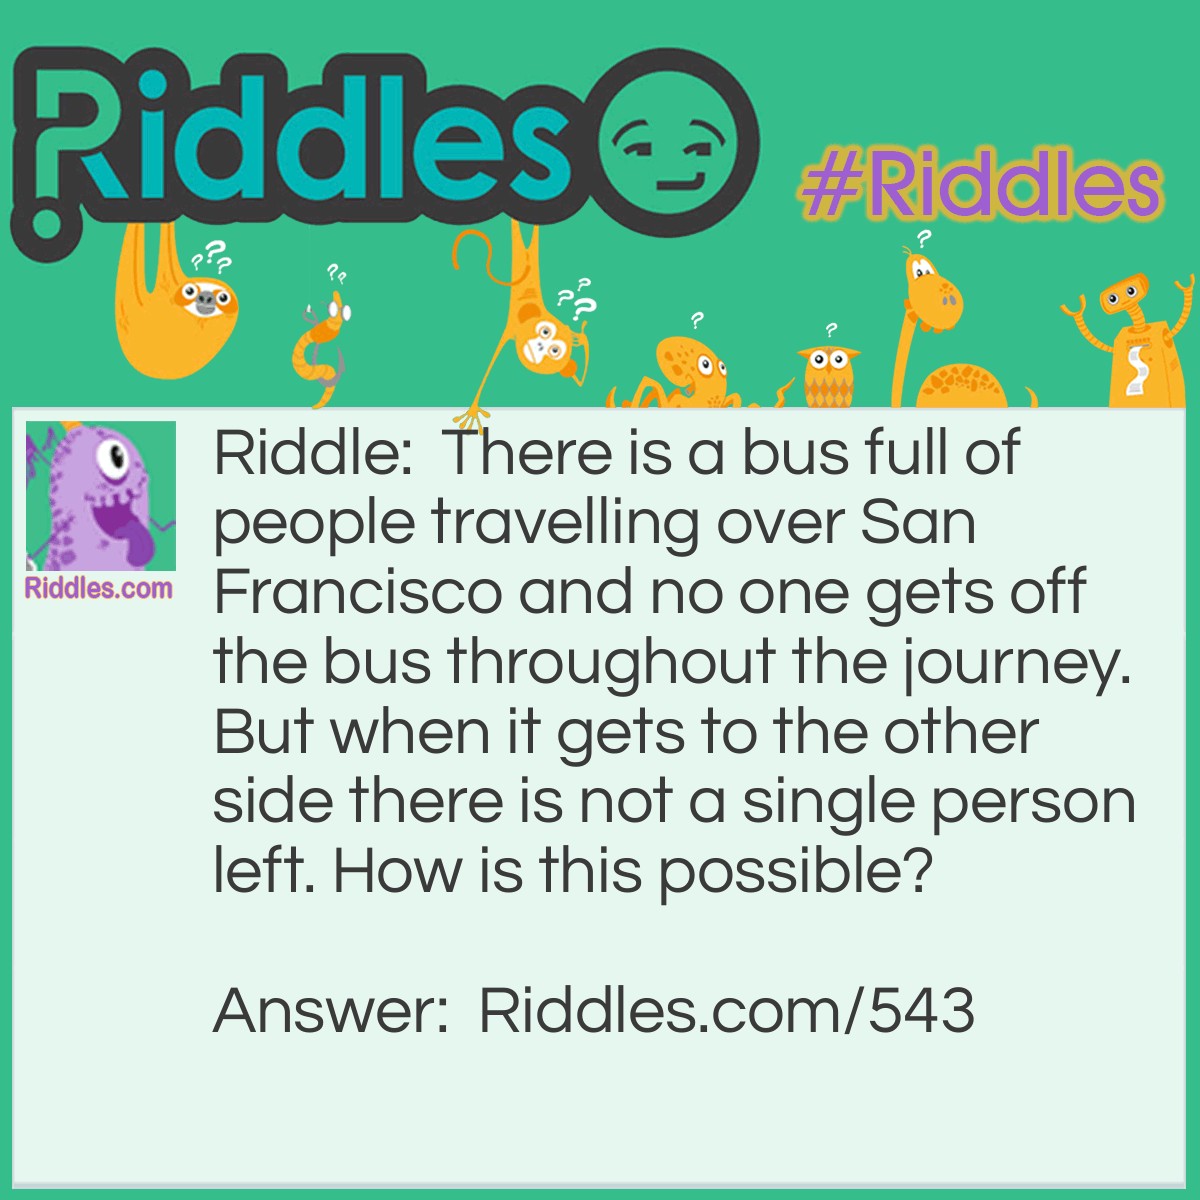 Riddle: There is a bus full of people travelling over San Francisco and no one gets off the bus throughout the journey. But when it gets to the other side there is not a single person left. How is this possible? Answer: They are all married.